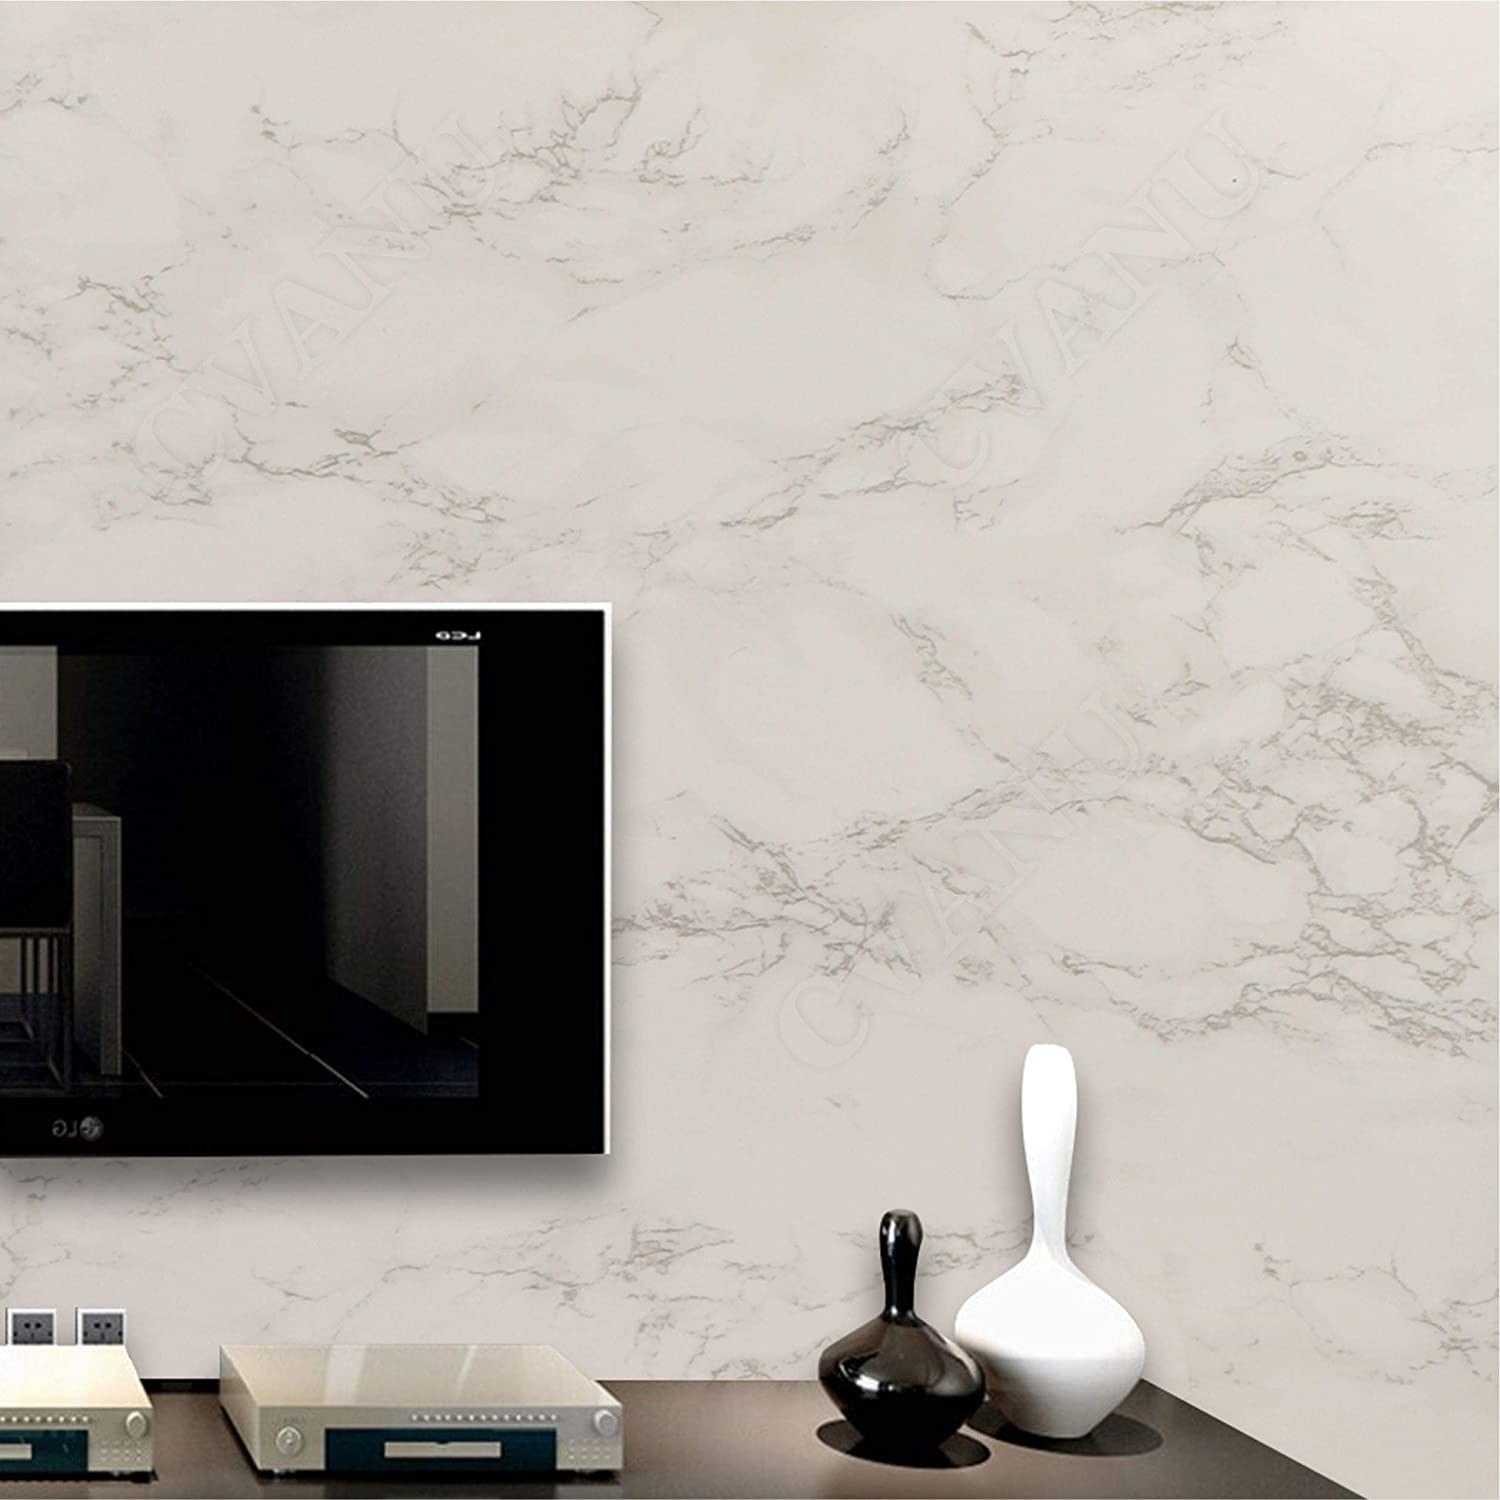 Cream coloured wallpaper with a marble finished on a wall behind a television